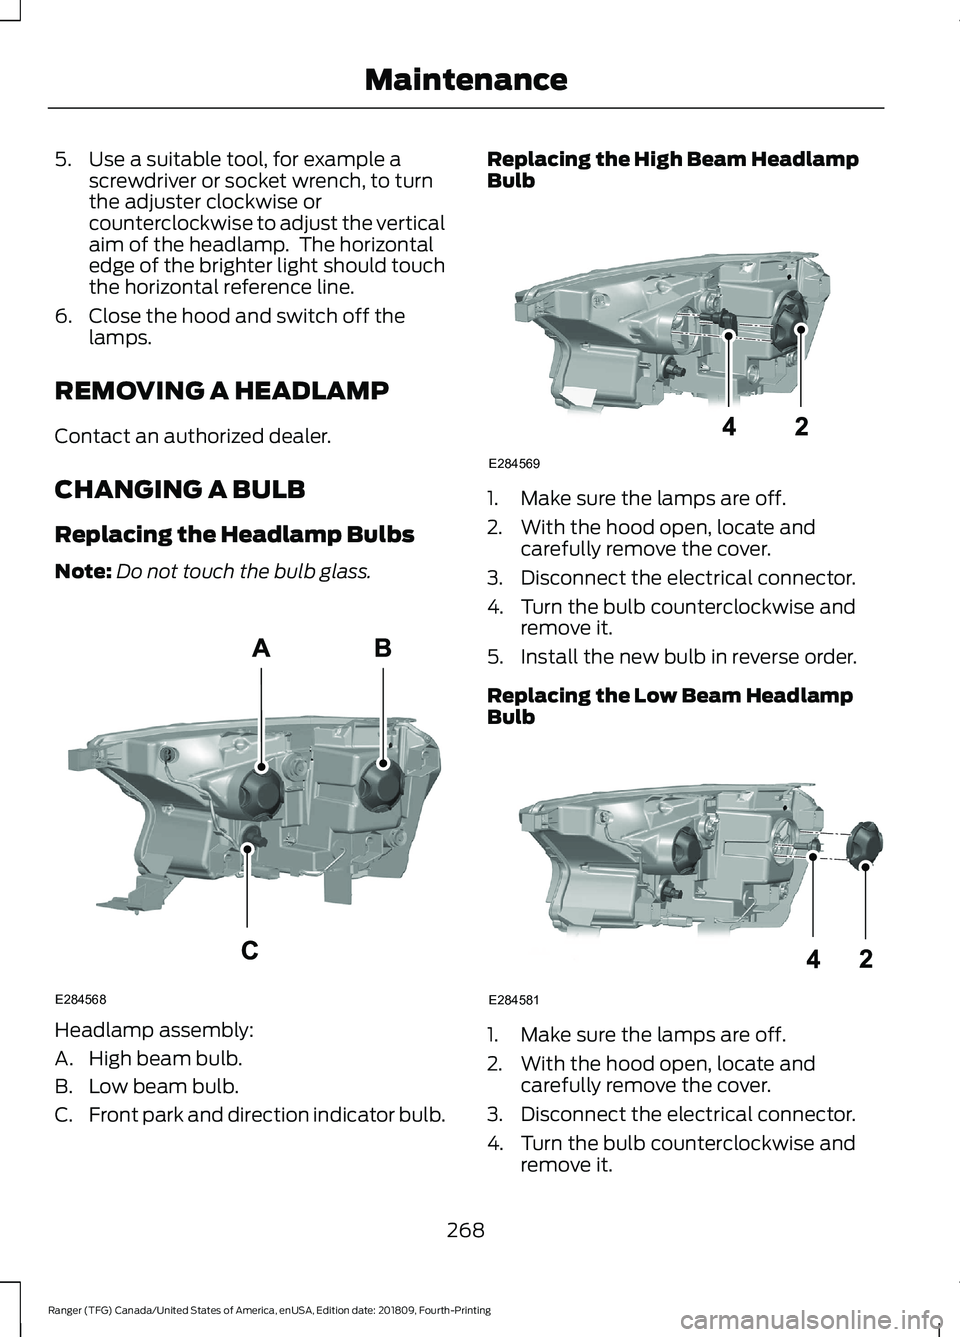 FORD RANGER 2019  Owners Manual 5. Use a suitable tool, for example a
screwdriver or socket wrench, to turn
the adjuster clockwise or
counterclockwise to adjust the vertical
aim of the headlamp.  The horizontal
edge of the brighter 